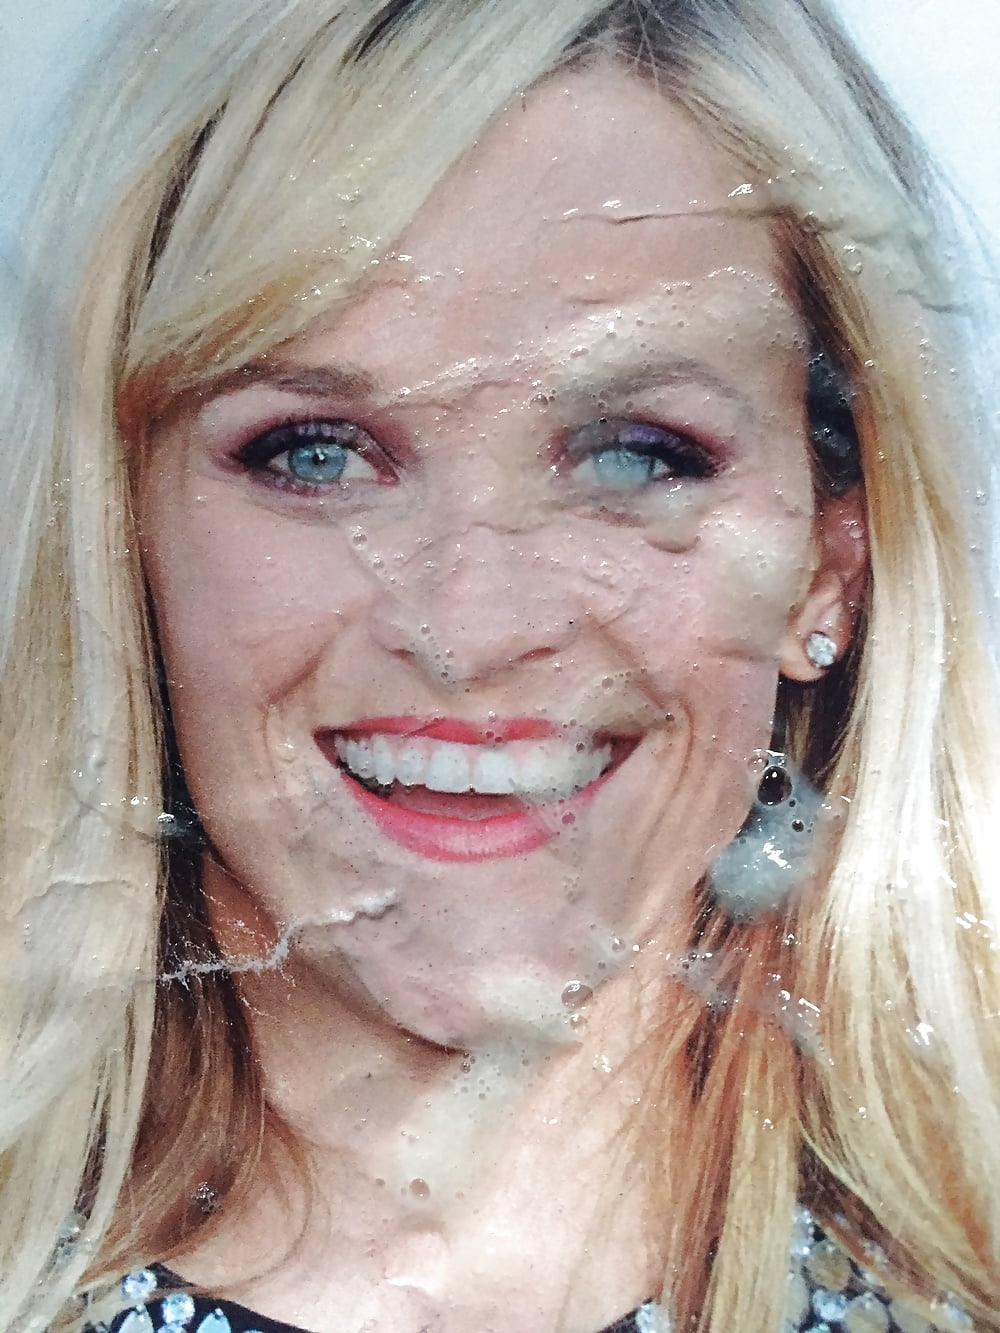 Cum Tribute - Reese Witherspoon 2 (11/25)